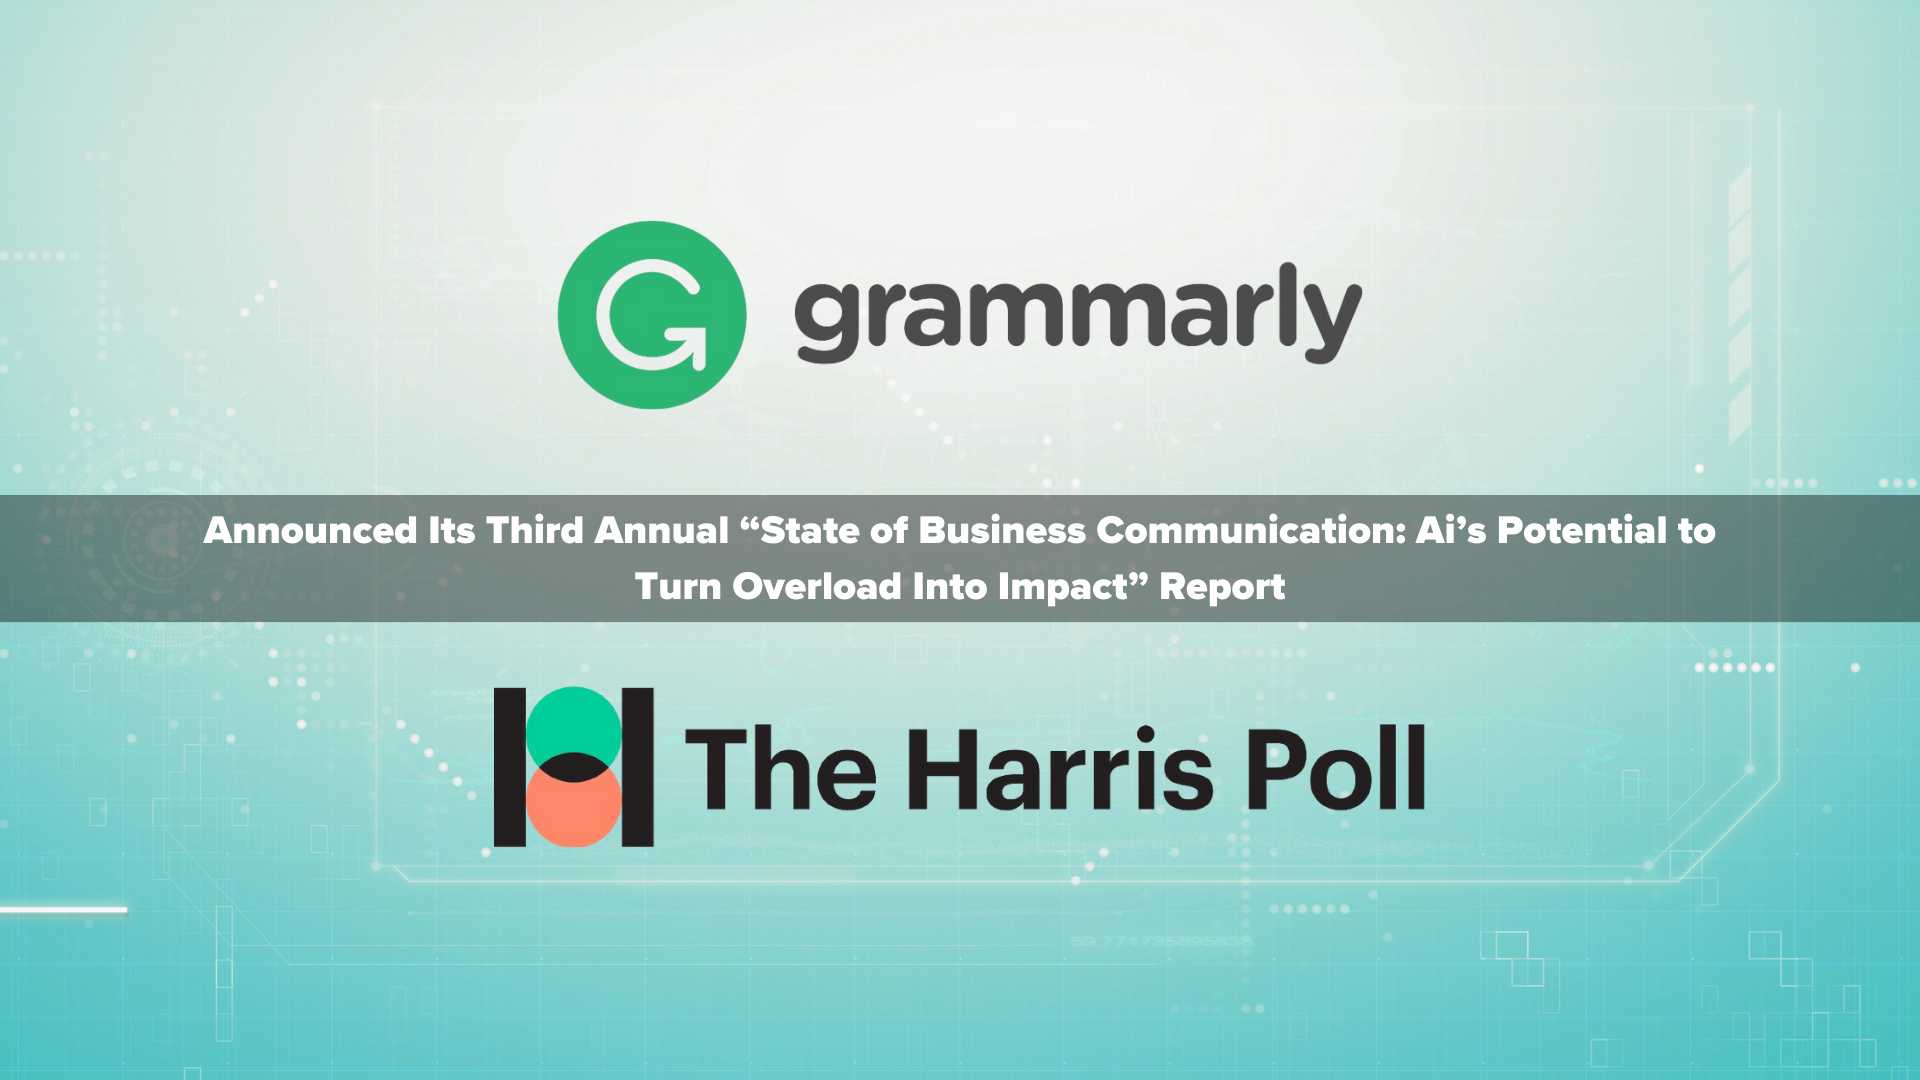 Grammarly and Harris Poll Find Using Generative AI for Communication Could Save Up to $1.6 Trillion Annually in U.S. Productivity